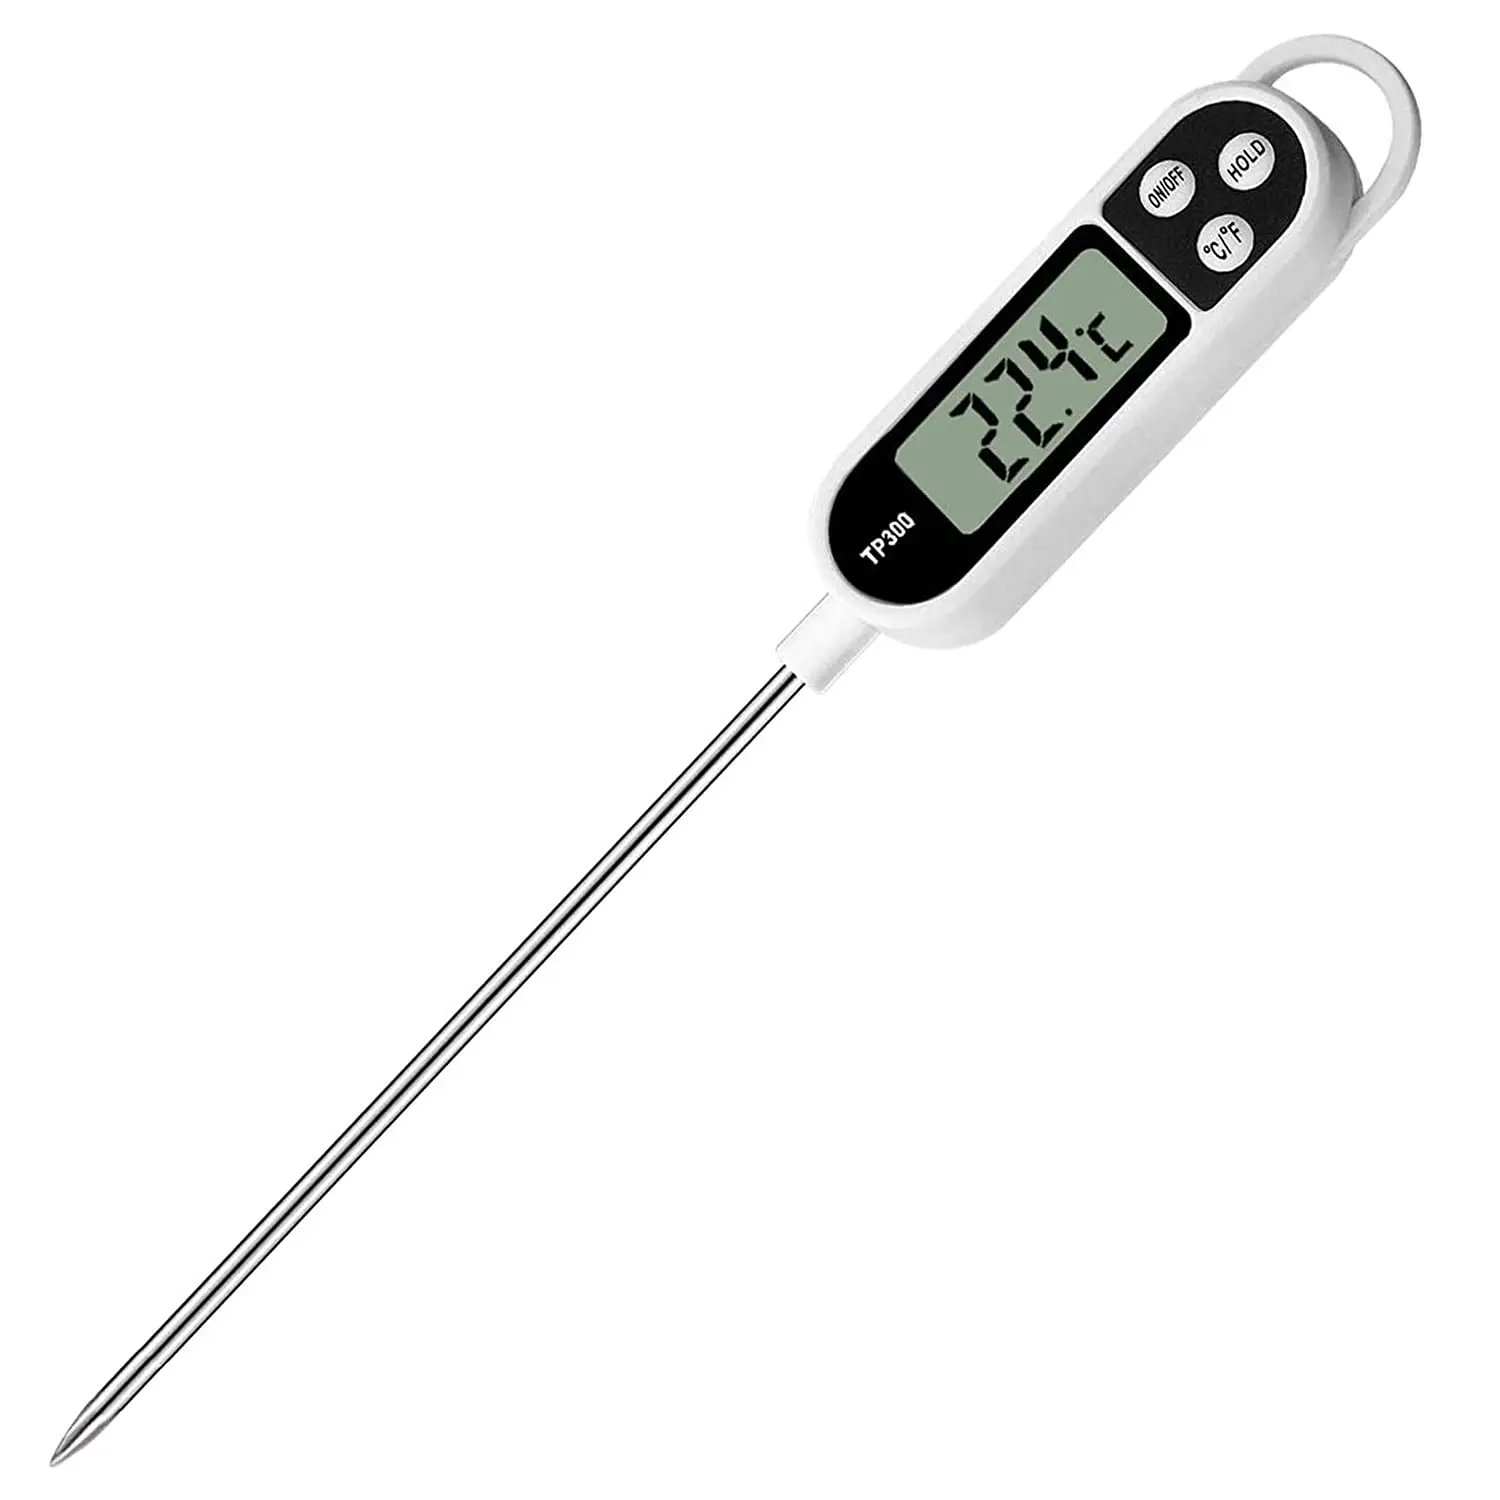 Digital Meat Thermometer Cooking Food Kitchen Barbecue Probe